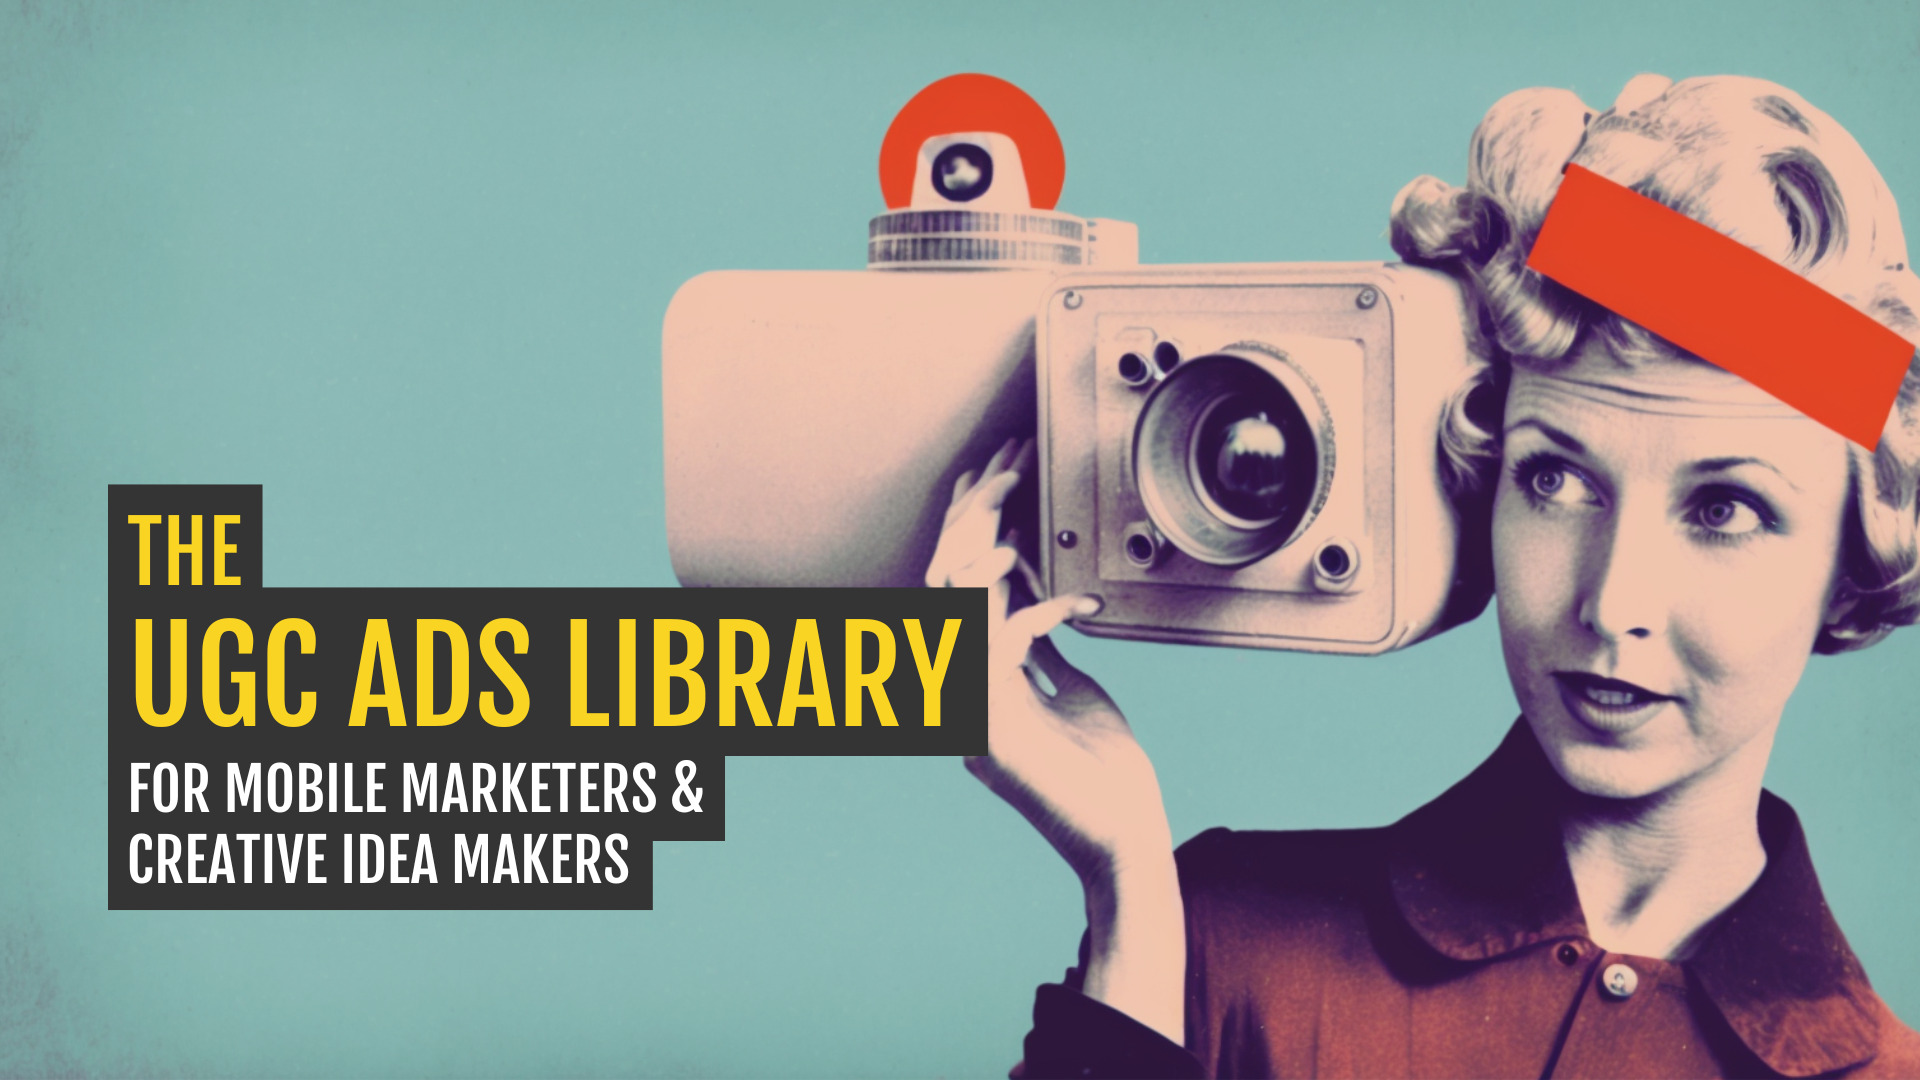 The UGC Ads Library for mobile marketers and creative idea makers